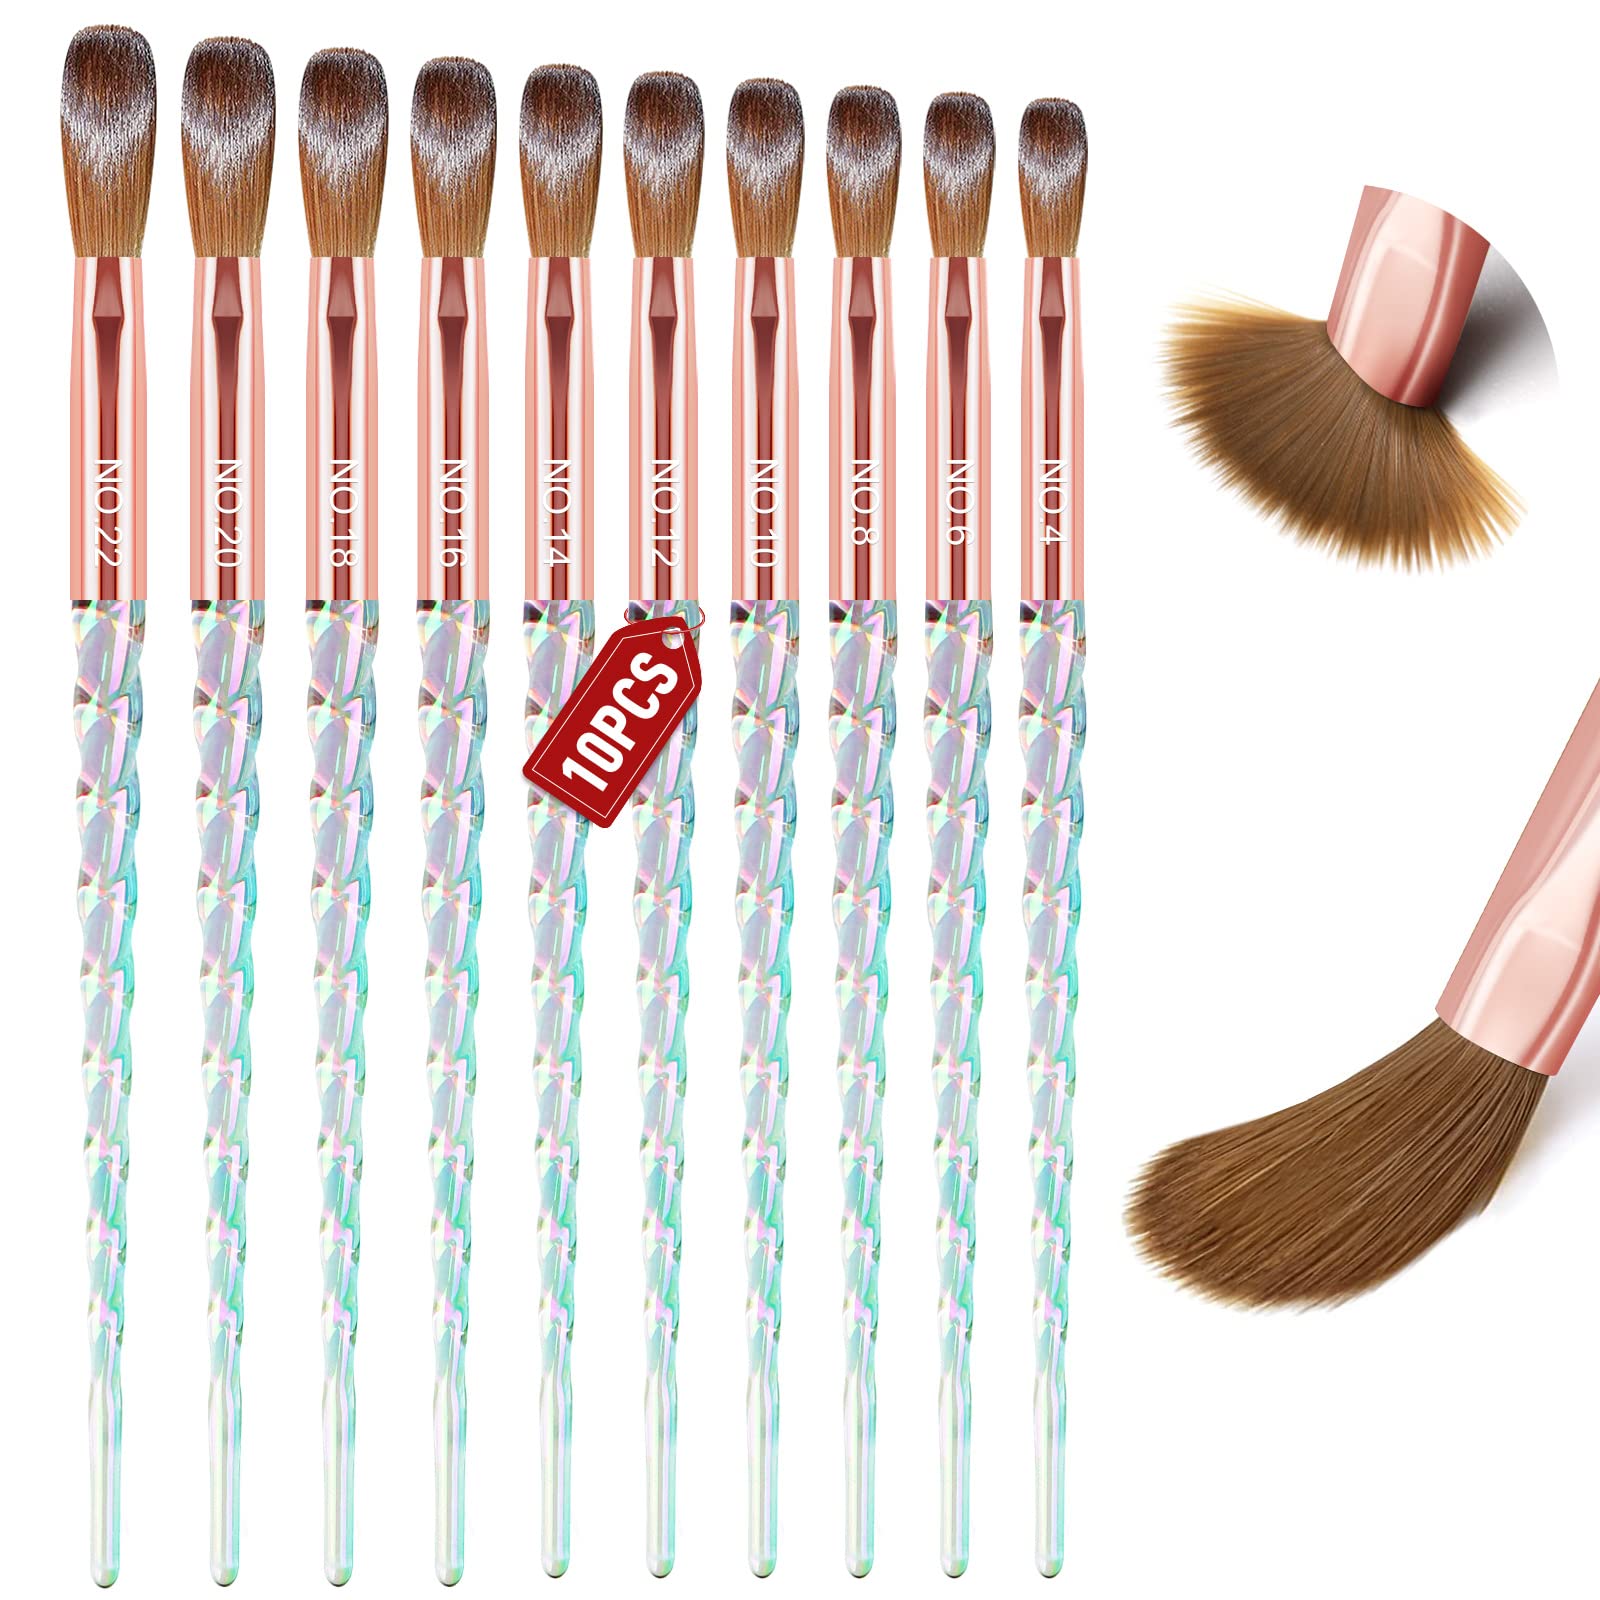 Beauty Magnet Brush Collection